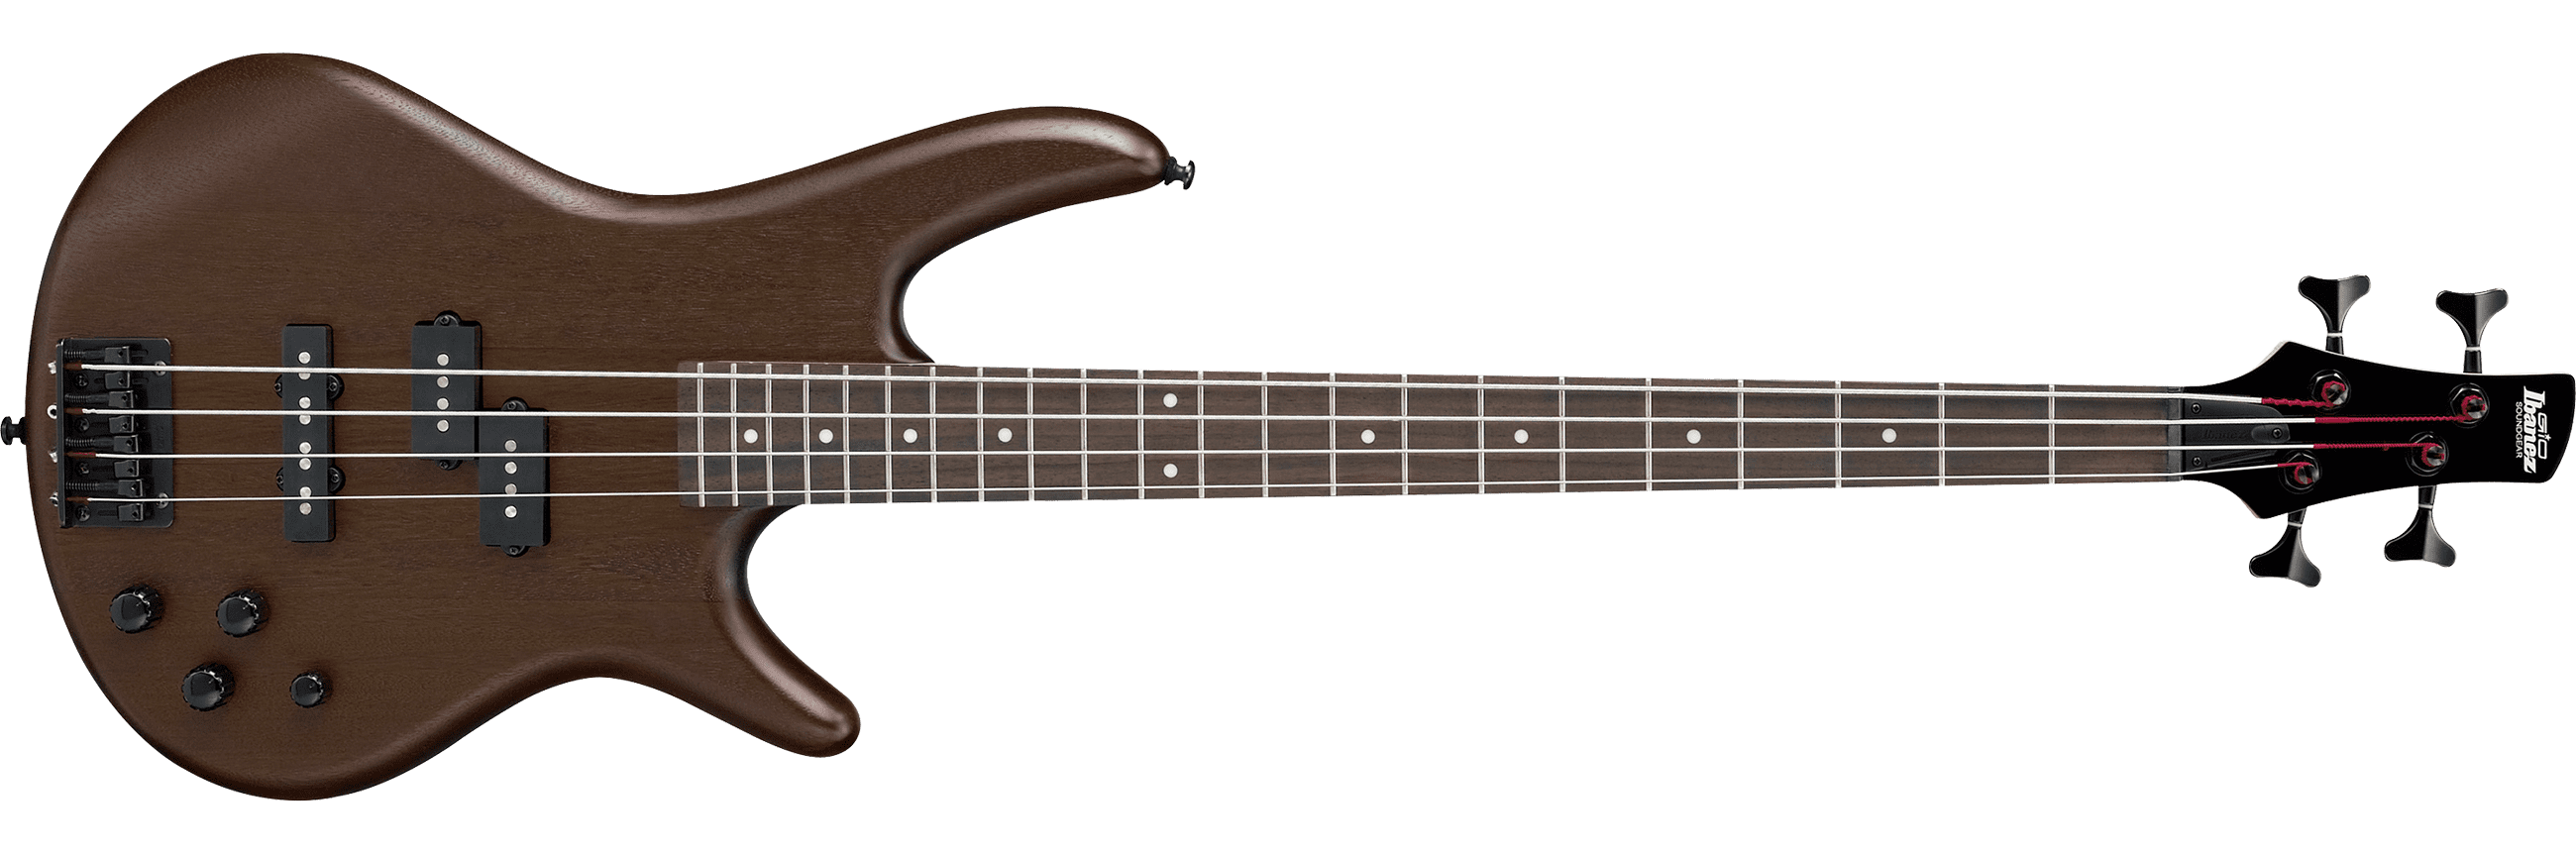 Ibanez GSR200BWNF 4-String Electric Bass Walunt Flat Finish with Gig Bag 